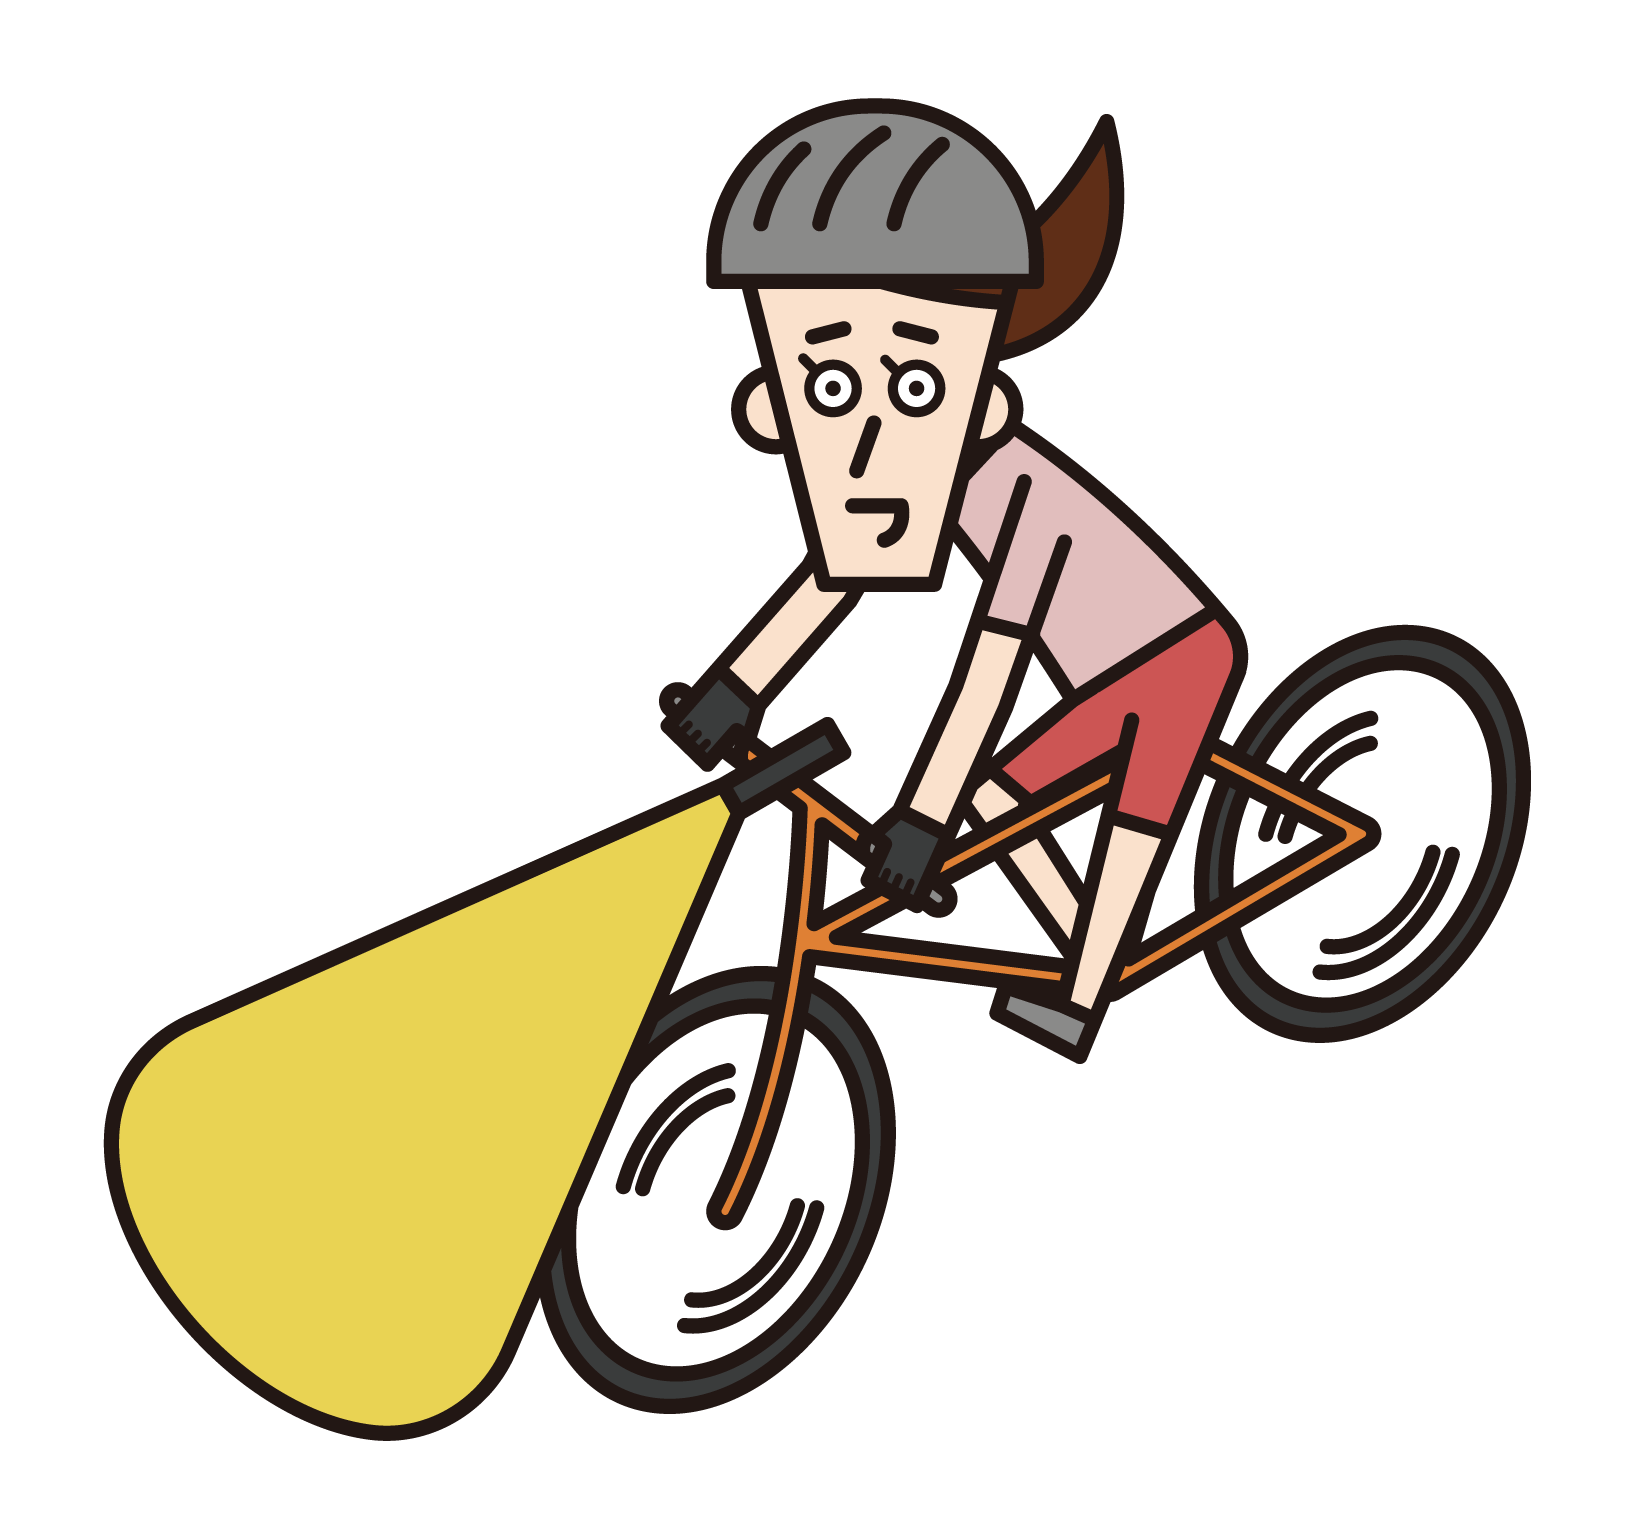 Illustration of a man riding a bicycle with a light on it